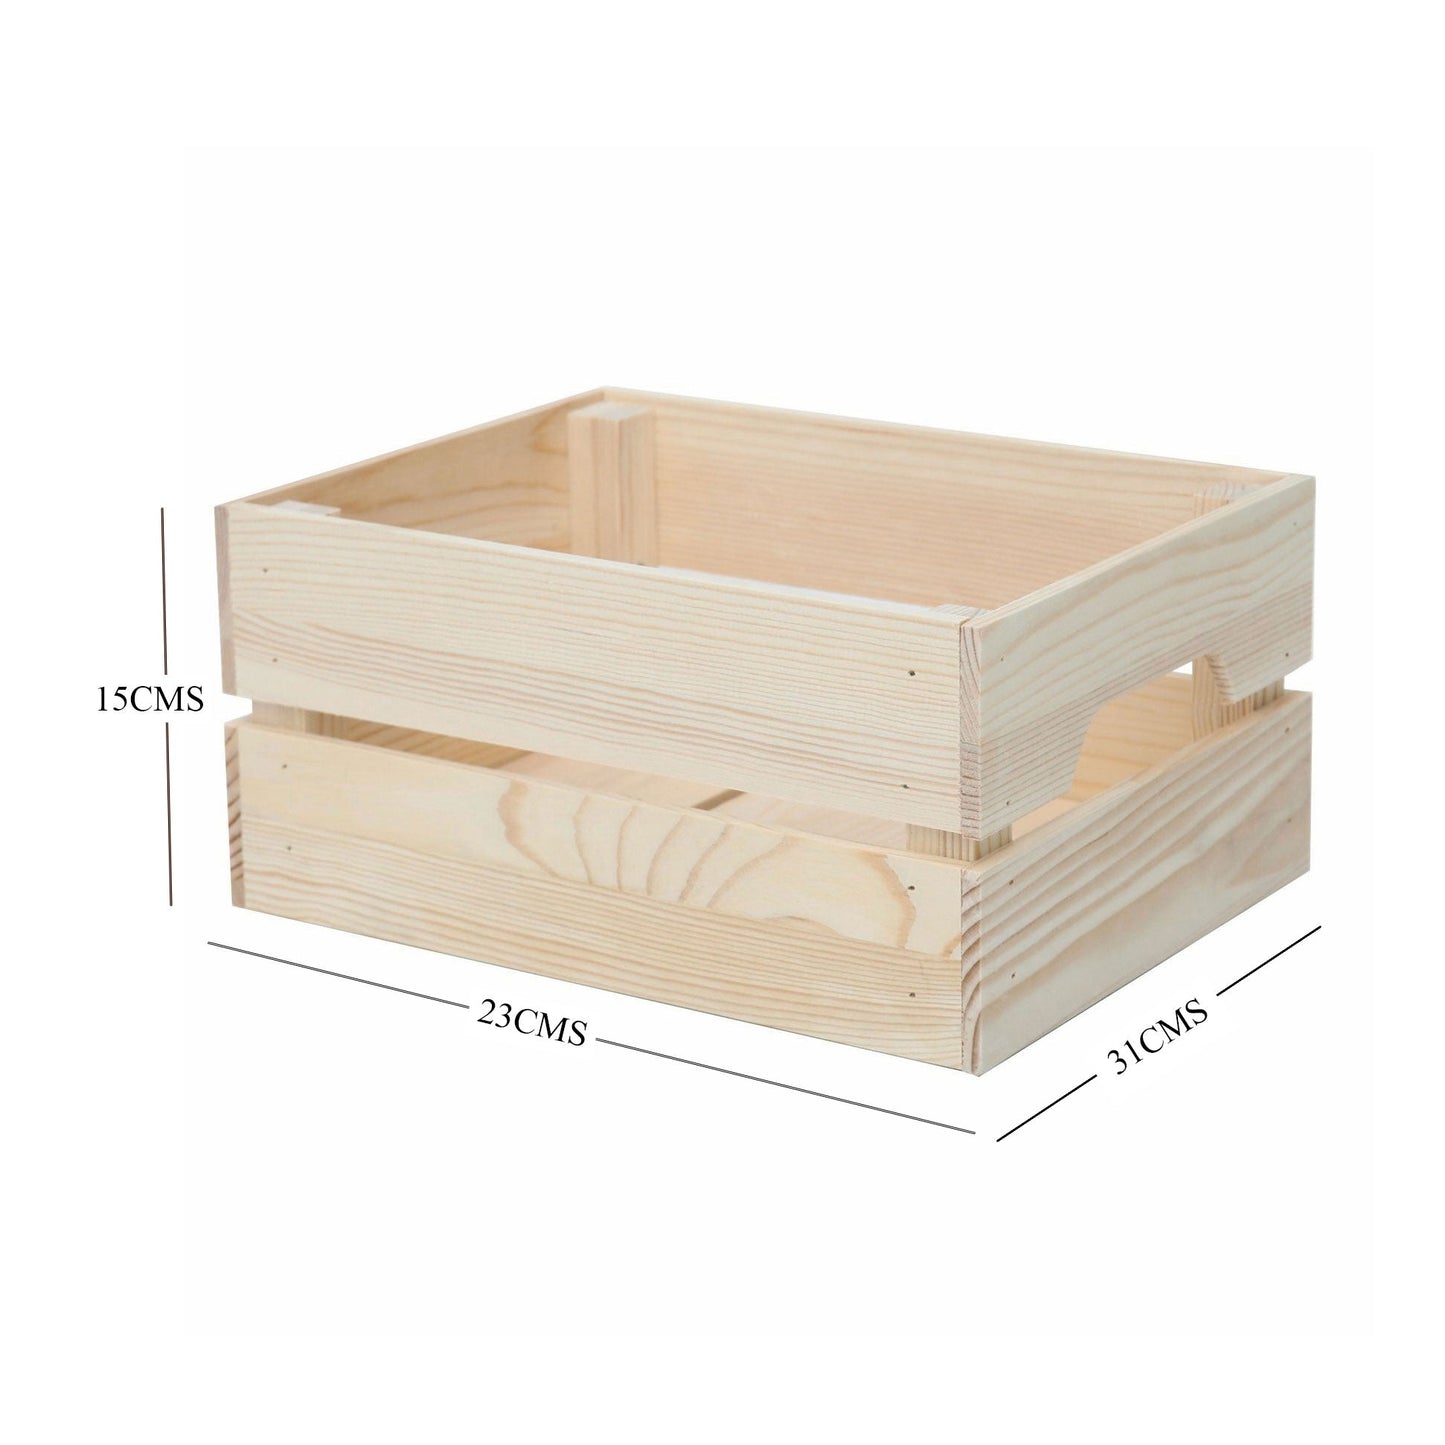 Personalised Engraved Wooden Crate